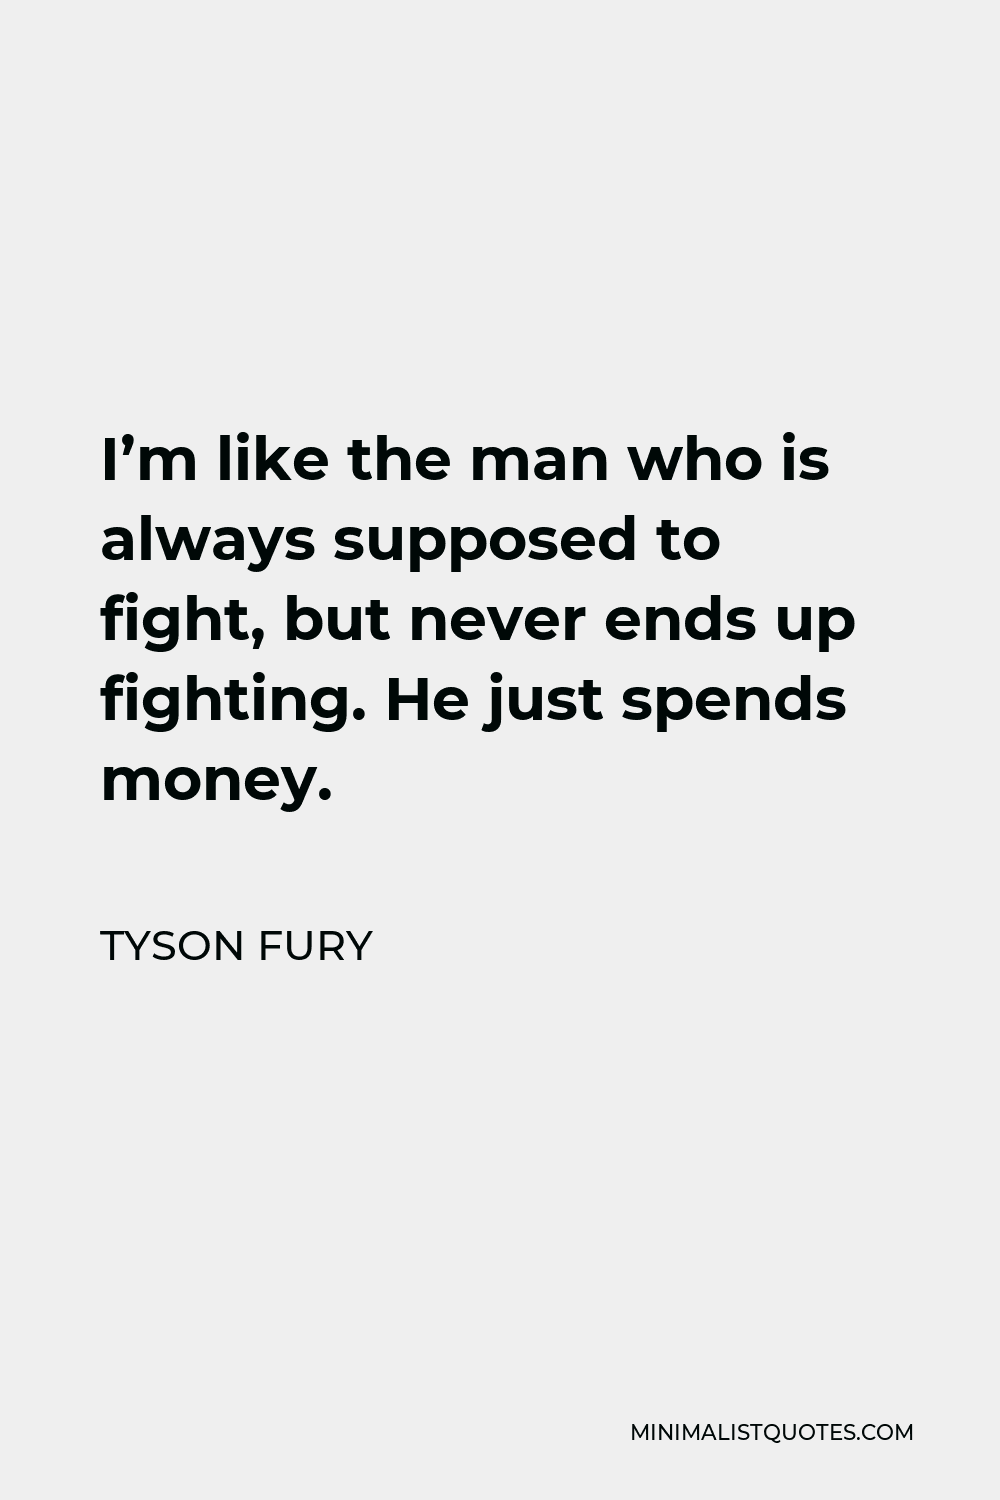 Tyson Fury Quote - I’m like the man who is always supposed to fight, but never ends up fighting. He just spends money.